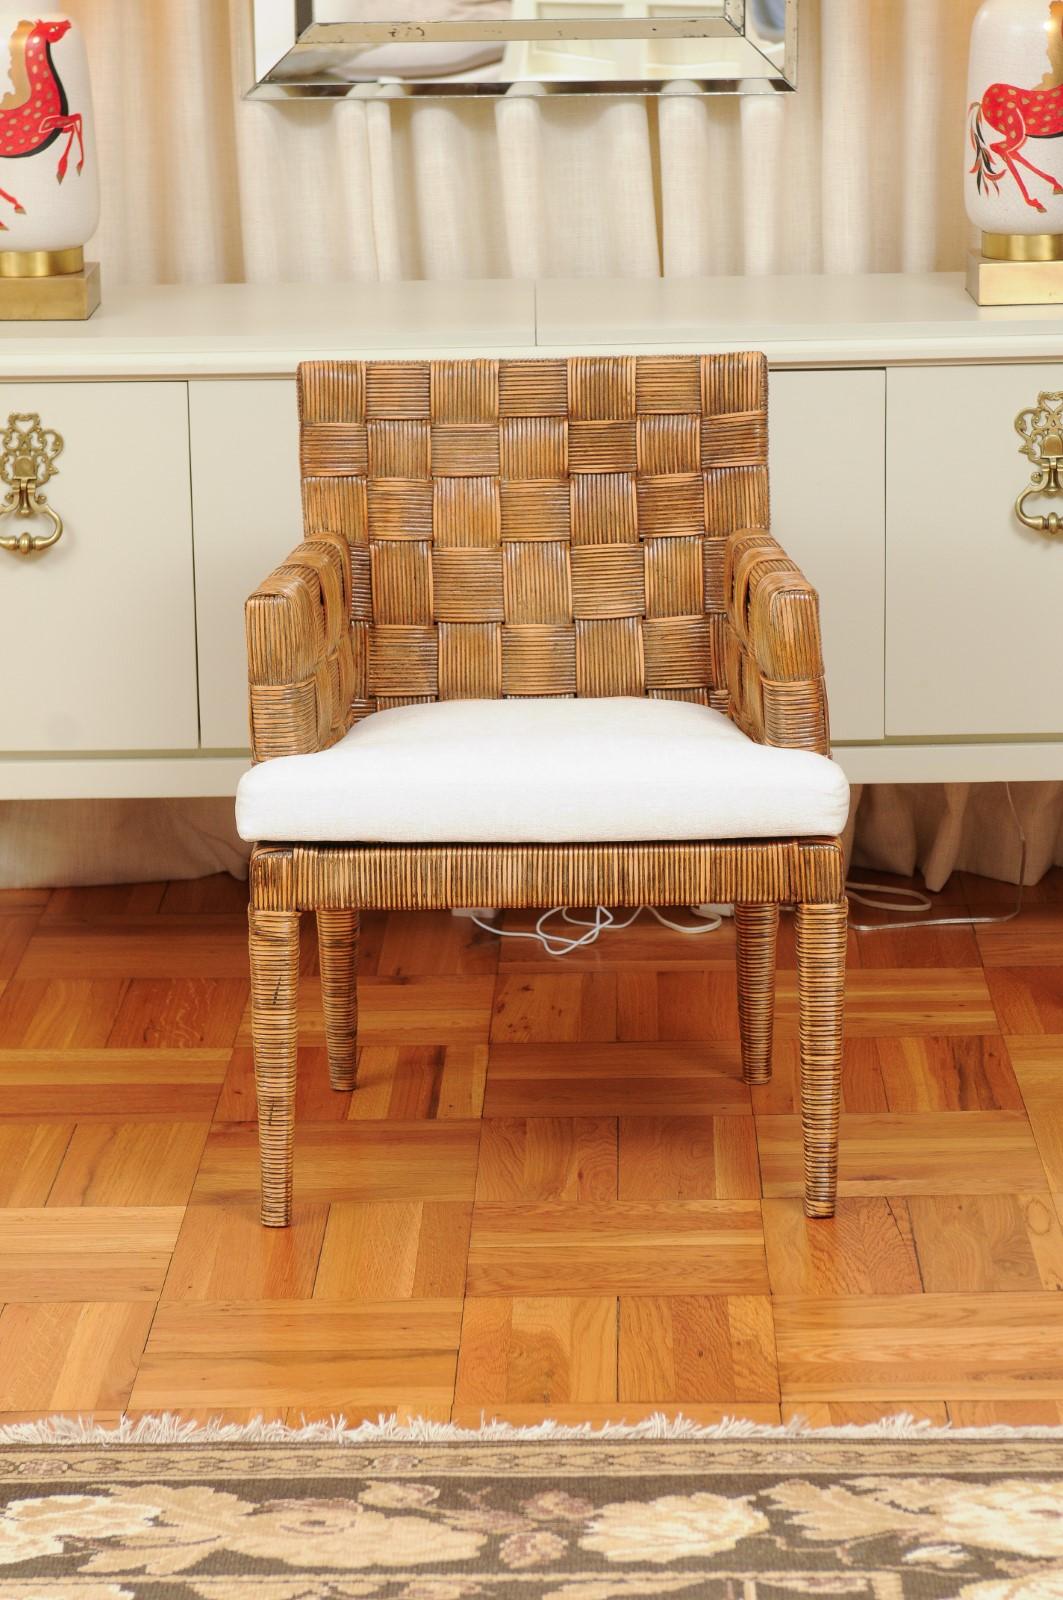 This magnificent large set of rare John Hutton Block Island ARM dining chair examples is unique on the World market. They are shipped as professionally photographed and described in the listing narrative: Meticulously professionally restored, newly